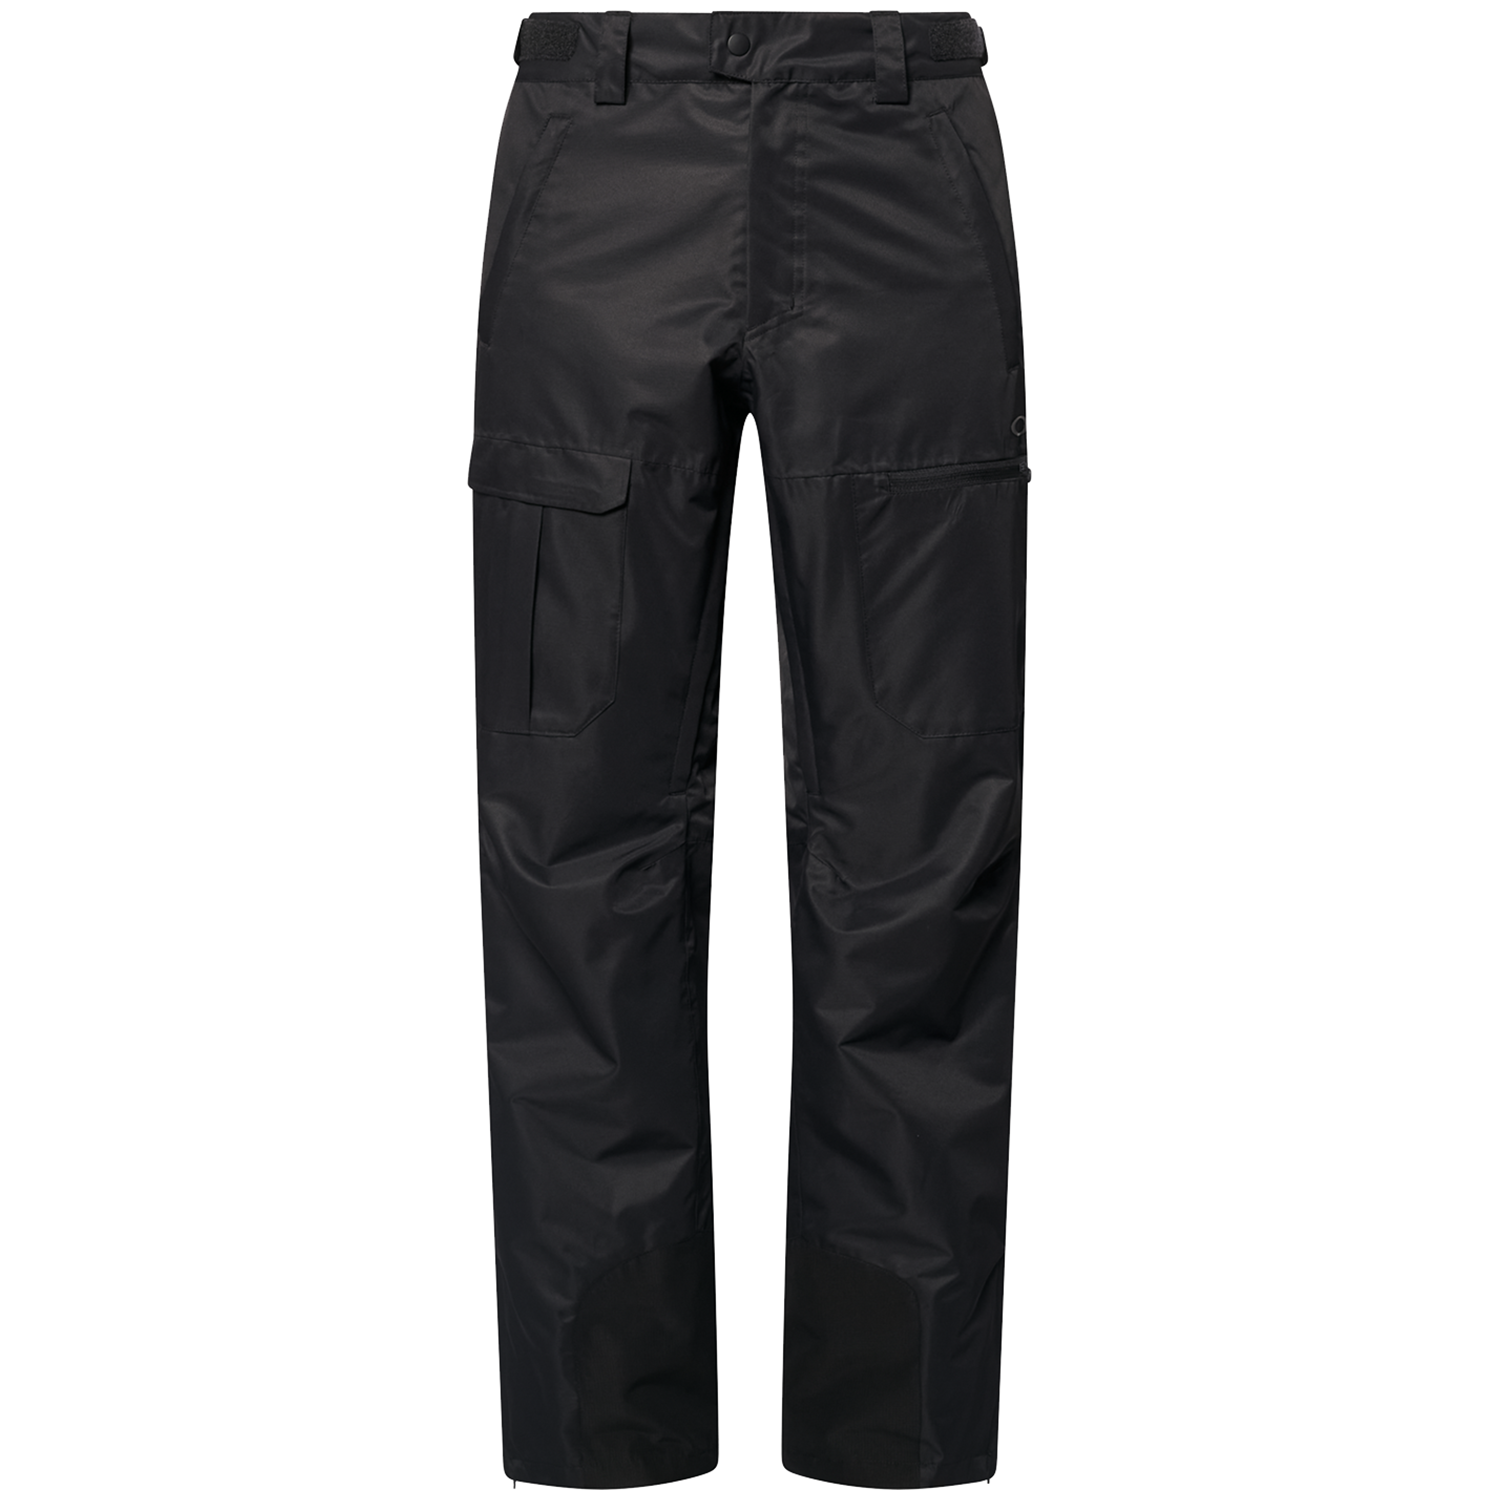 Брюки Oakley Divisional Cargo Shell, цвет Blackout cargo pants size s